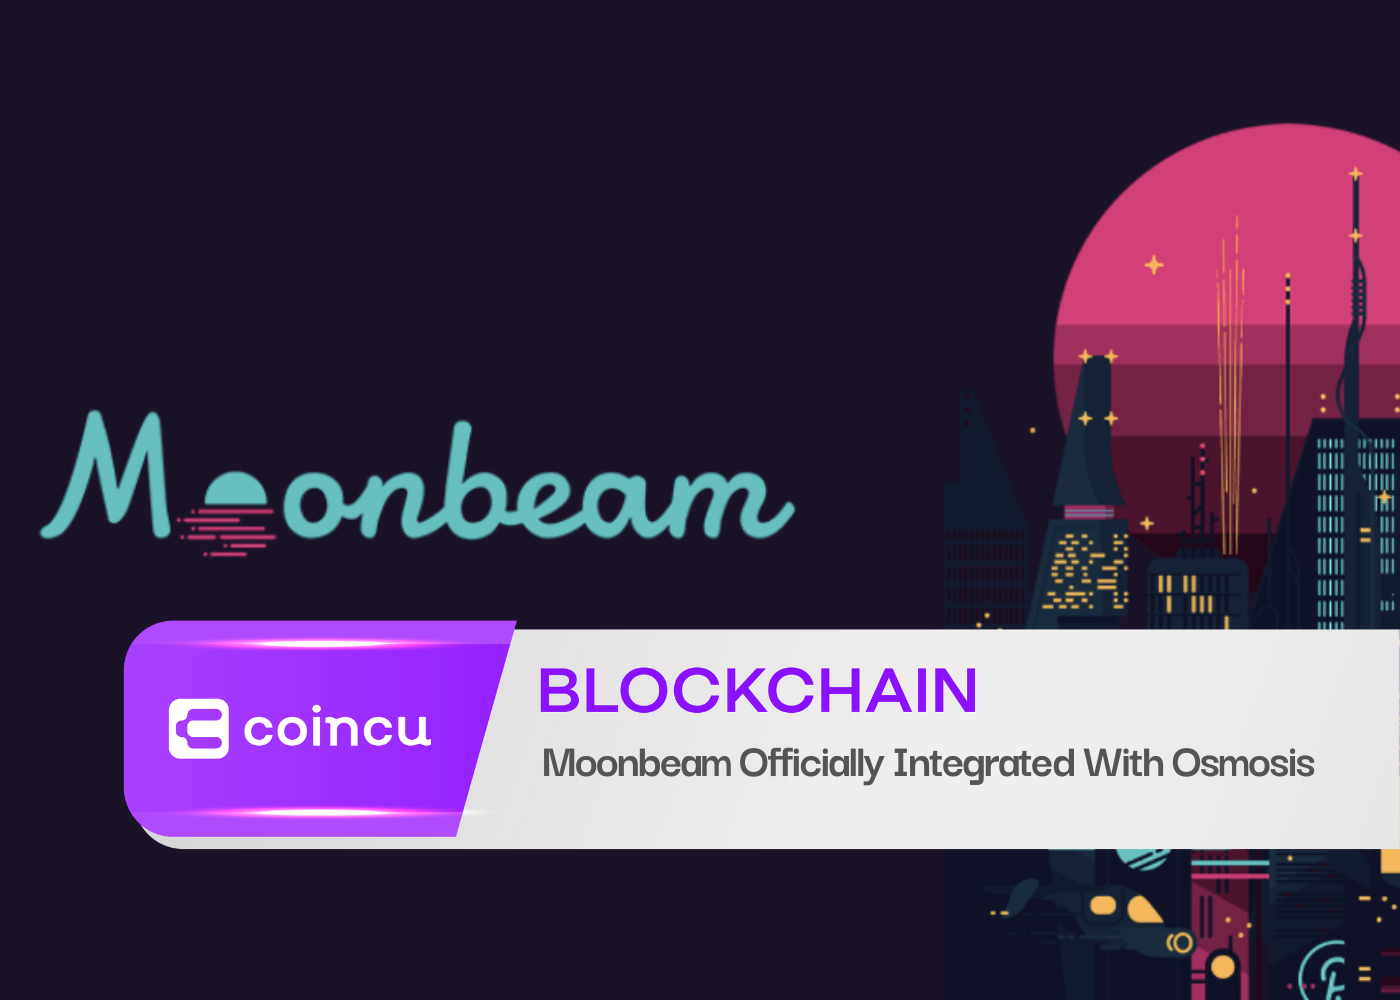 Moonbeam Officially Integrated With Osmosis